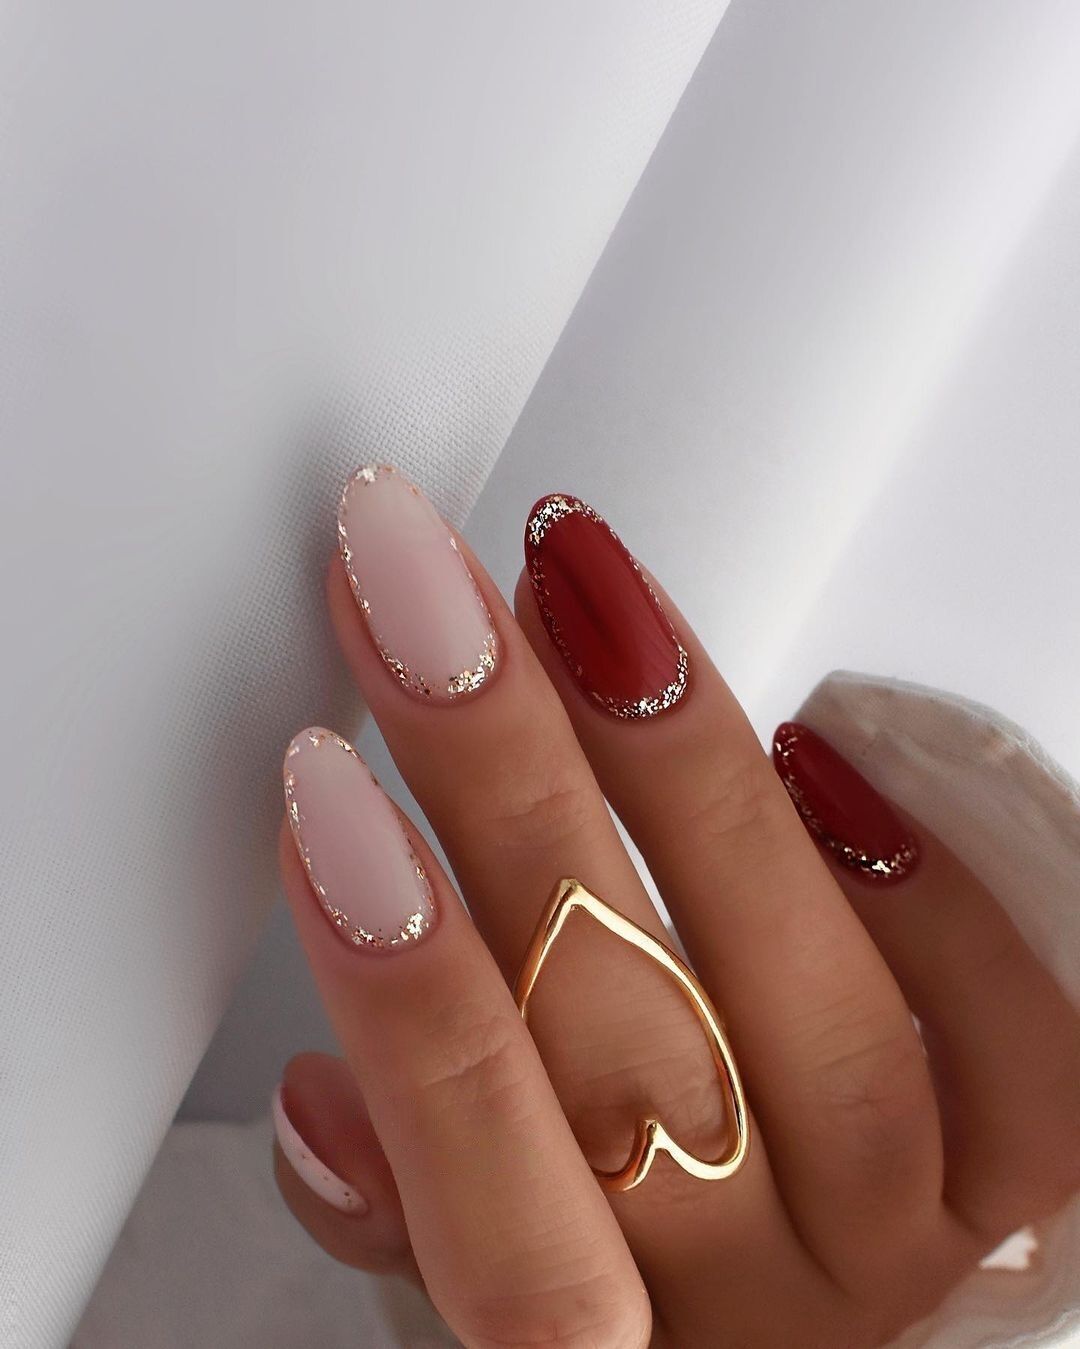 Manicure for the New Year: 7 exquisite designs for long nails. Photo